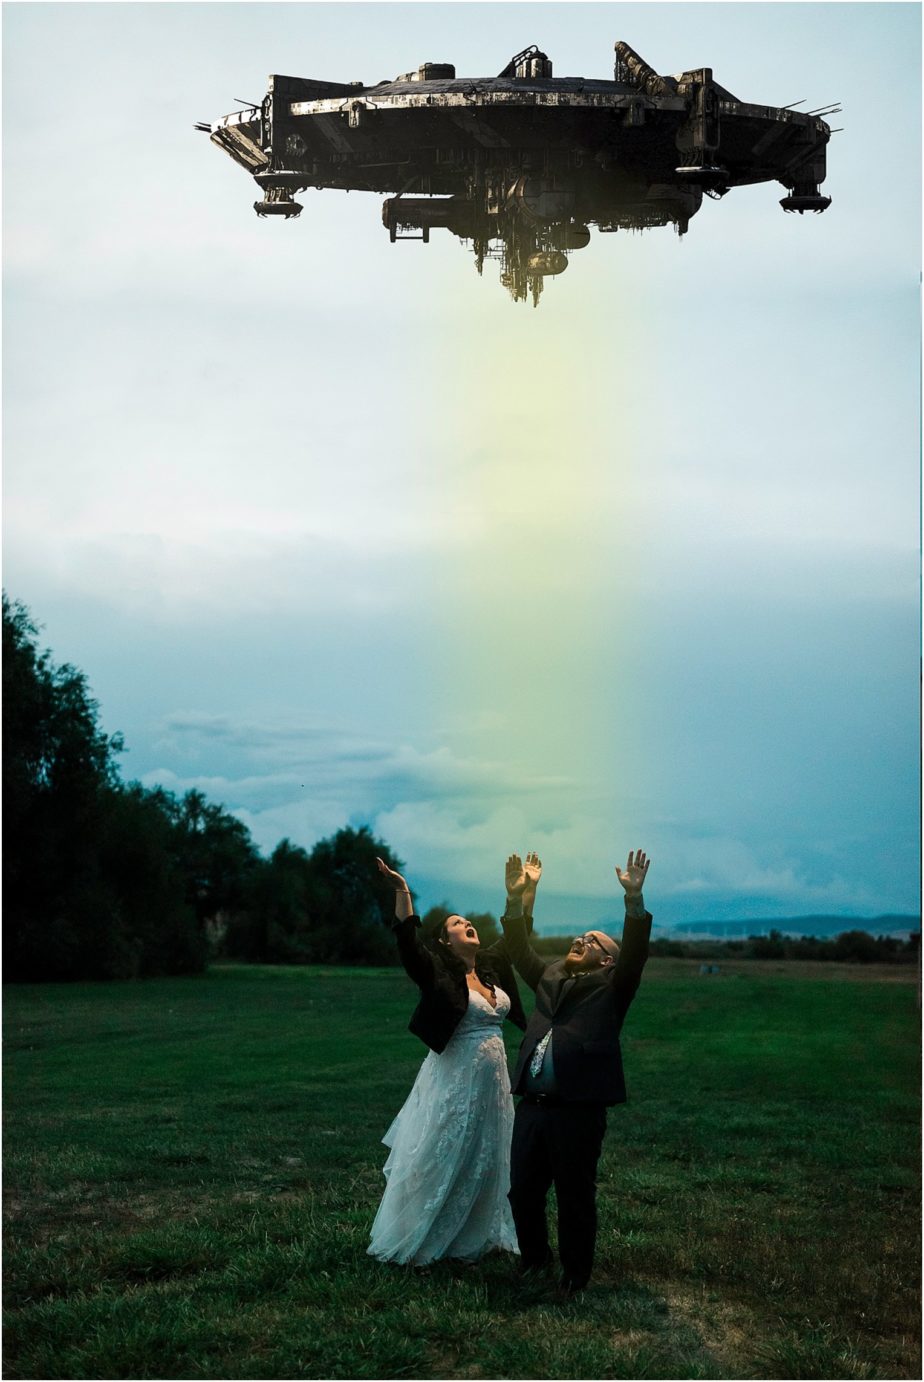 Favorite Wedding Moments of 2019 For Brides bride and groom getting upducted- photoshop